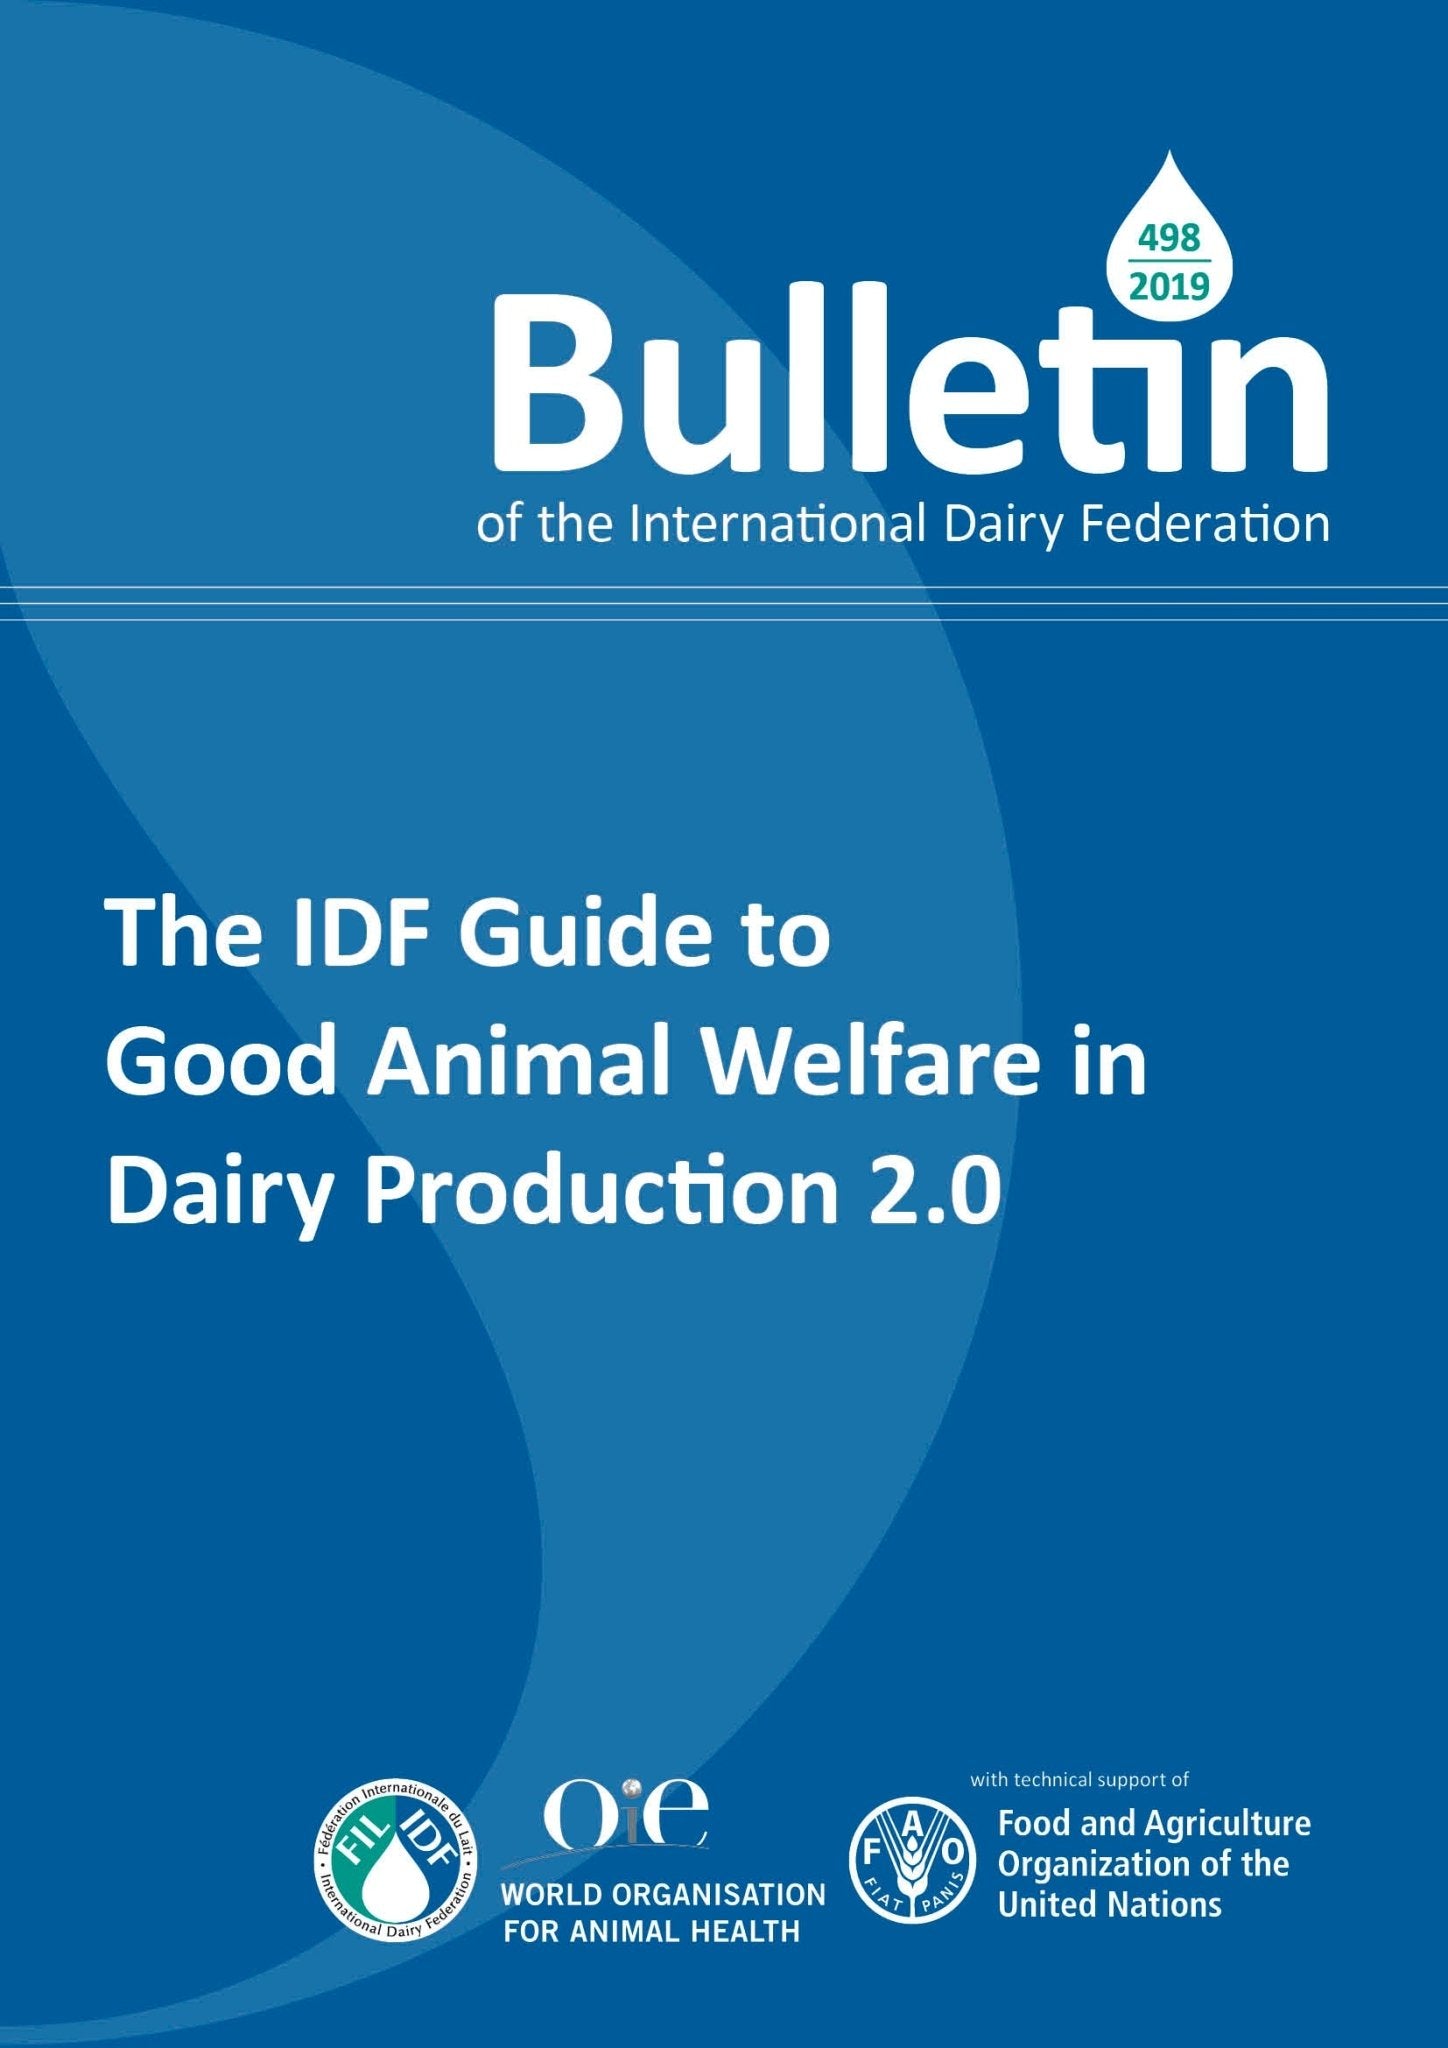 Bulletin of the IDF N° 498/2019: The IDF Guide to Good Animal Welfare in Dairy Production 2.0 - FIL-IDF